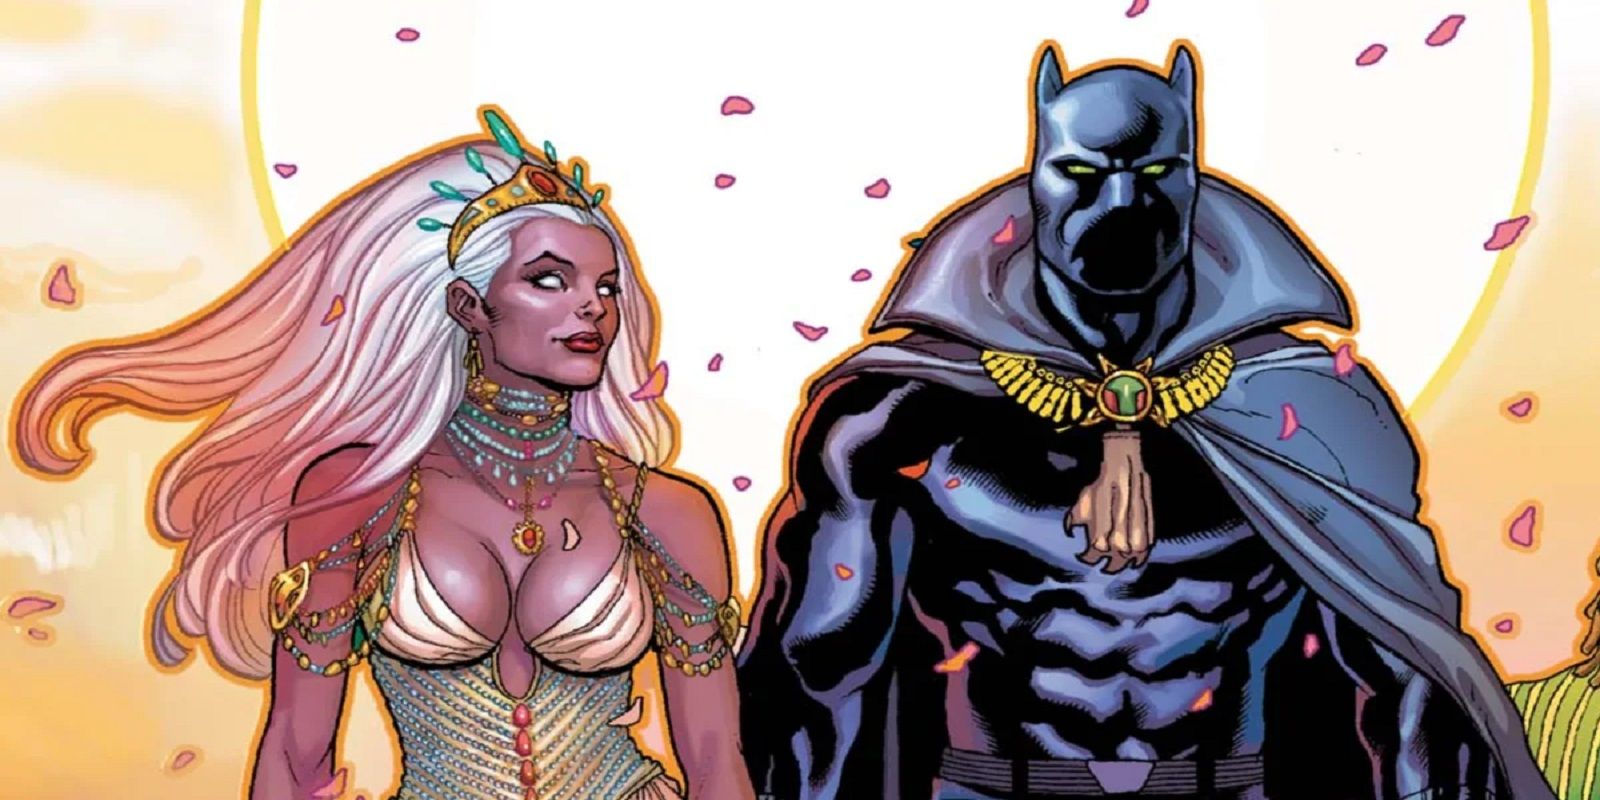 Marvel Comics' Storm and Black Panther hold hands on their wedding day.